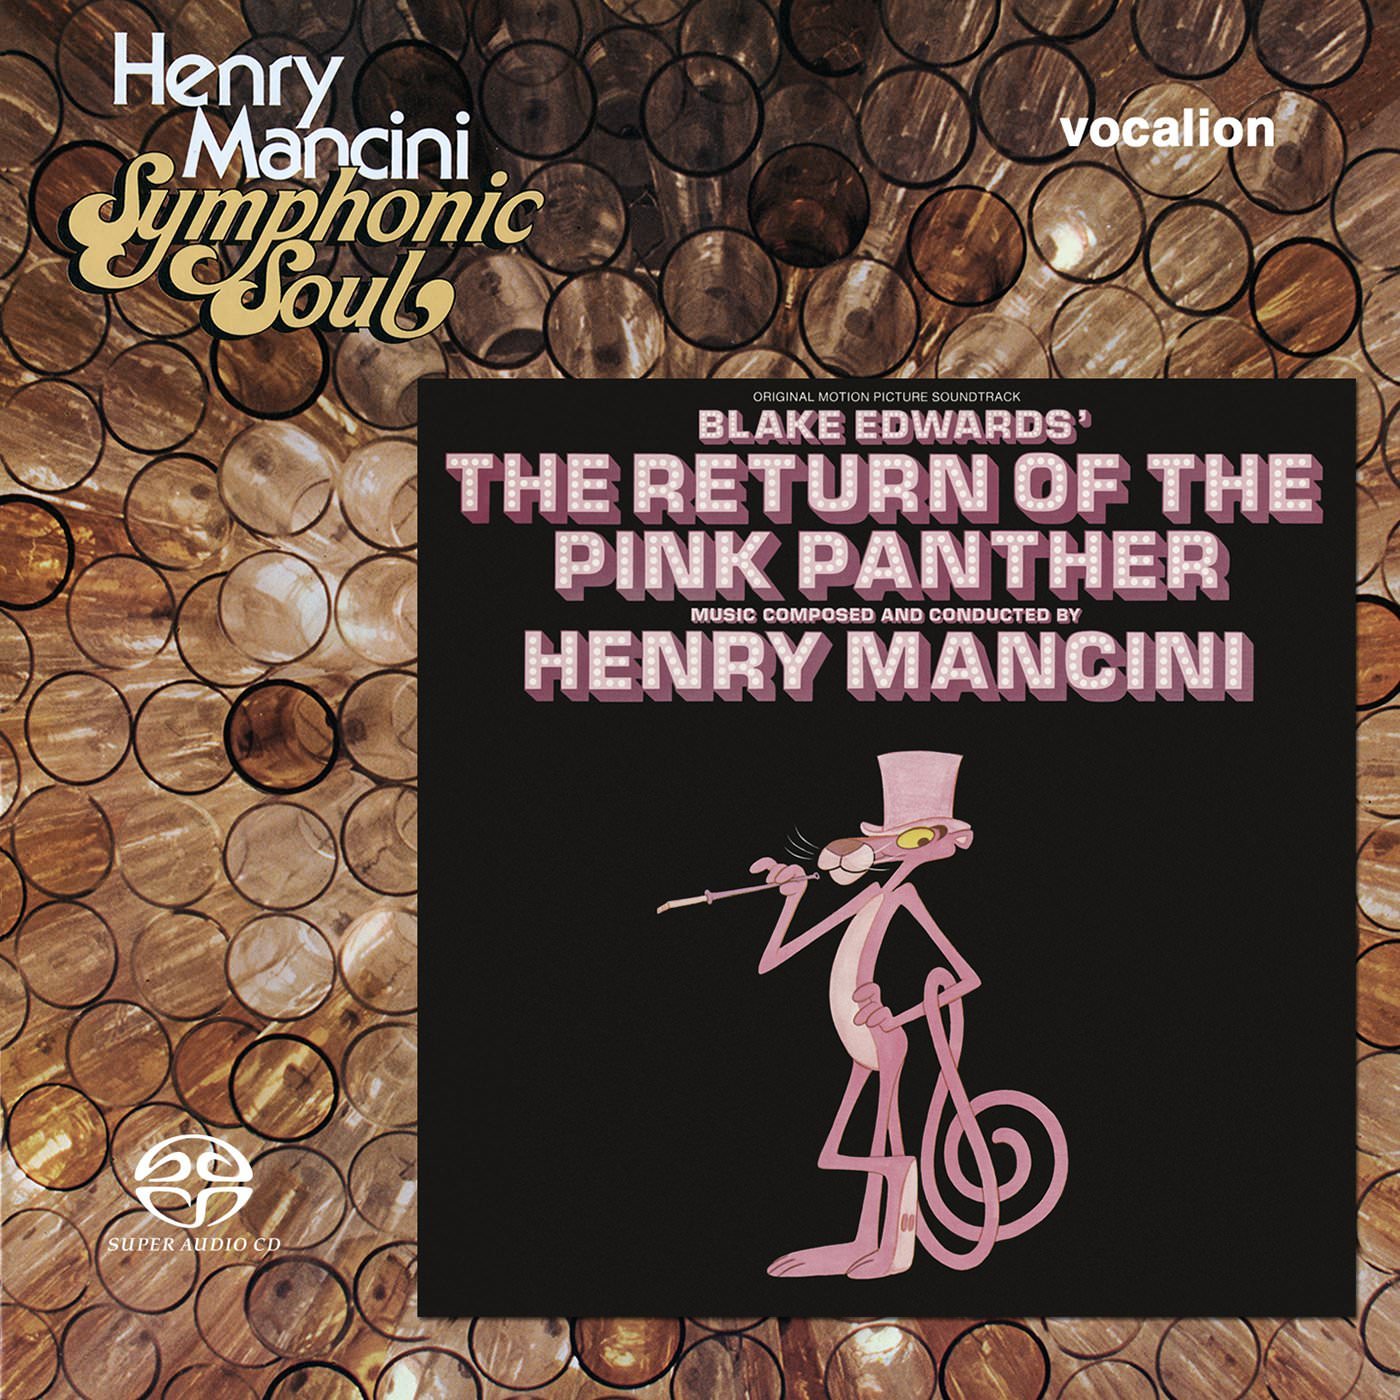 Henry Mancini – Return Of The Pink Panther & Symphonic Soul (1975) [Reissue 2018]  {SACD ISO + FLAC 24bit/88,2kHz}